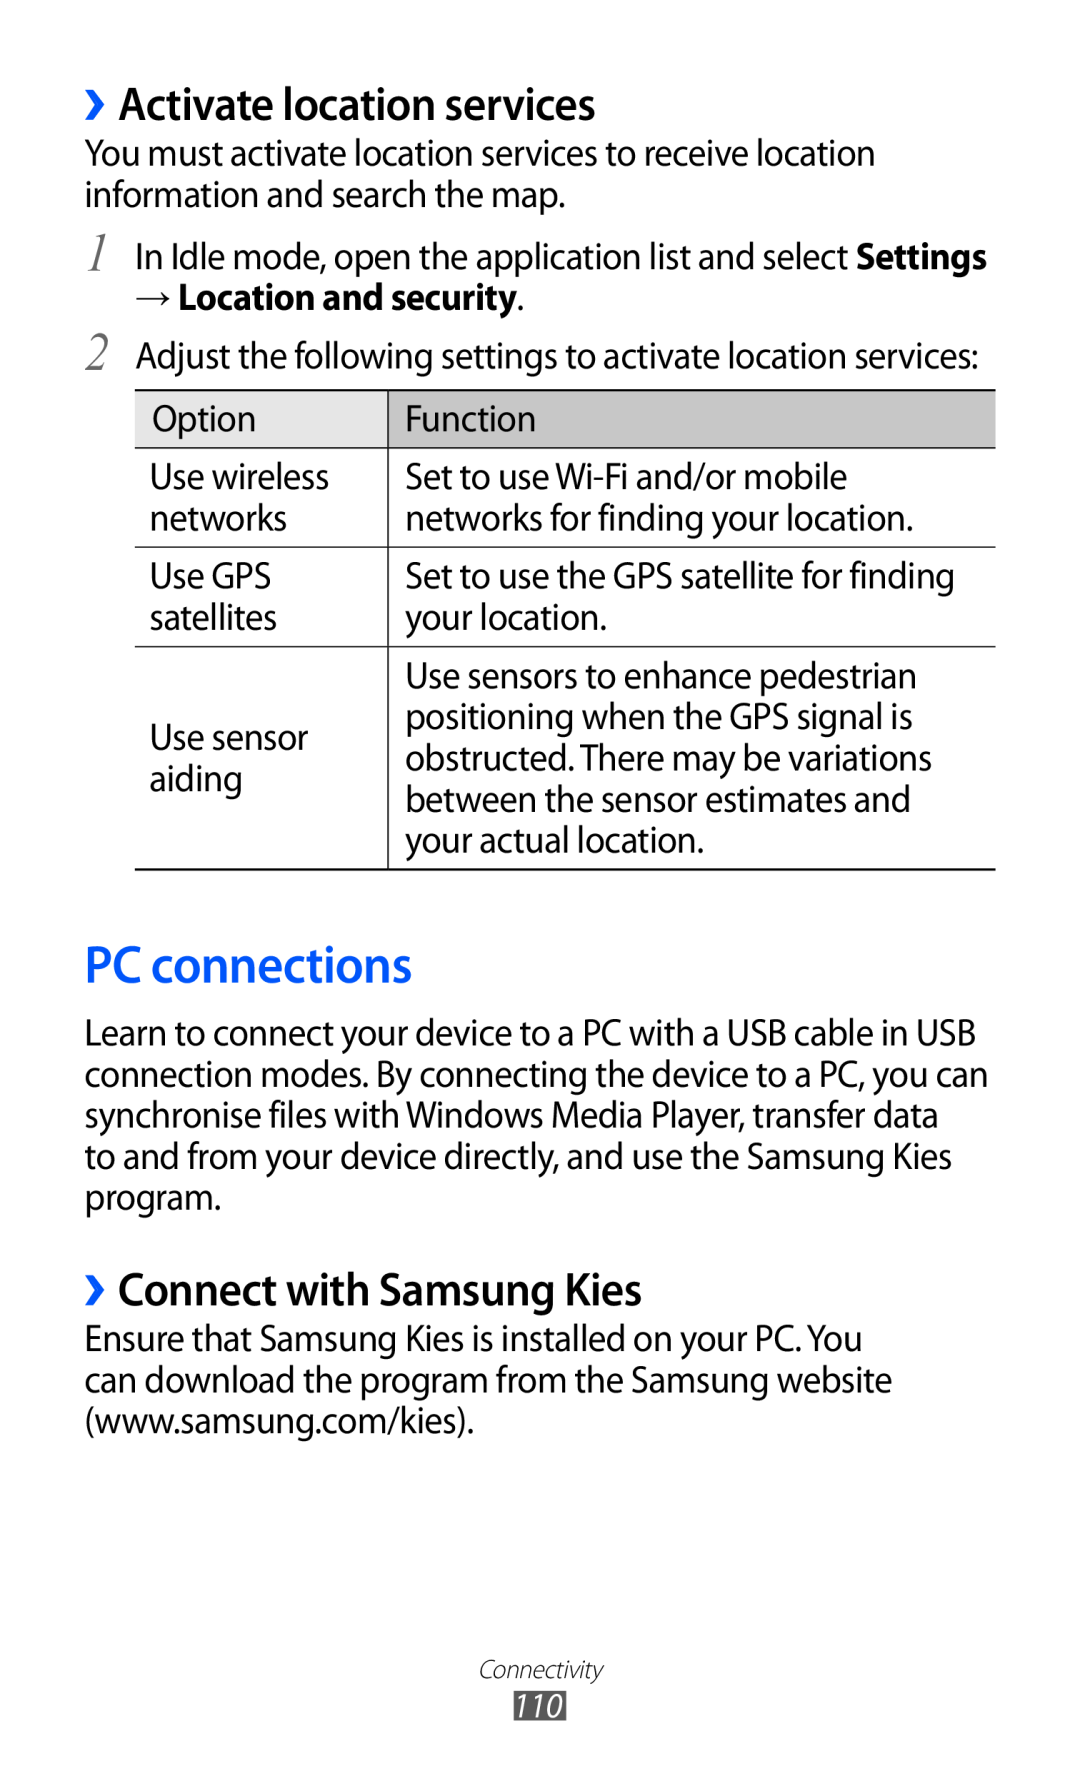 Samsung GT-I9070 PC connections, ››Activate location services, ››Connect with Samsung Kies, → Location and security 